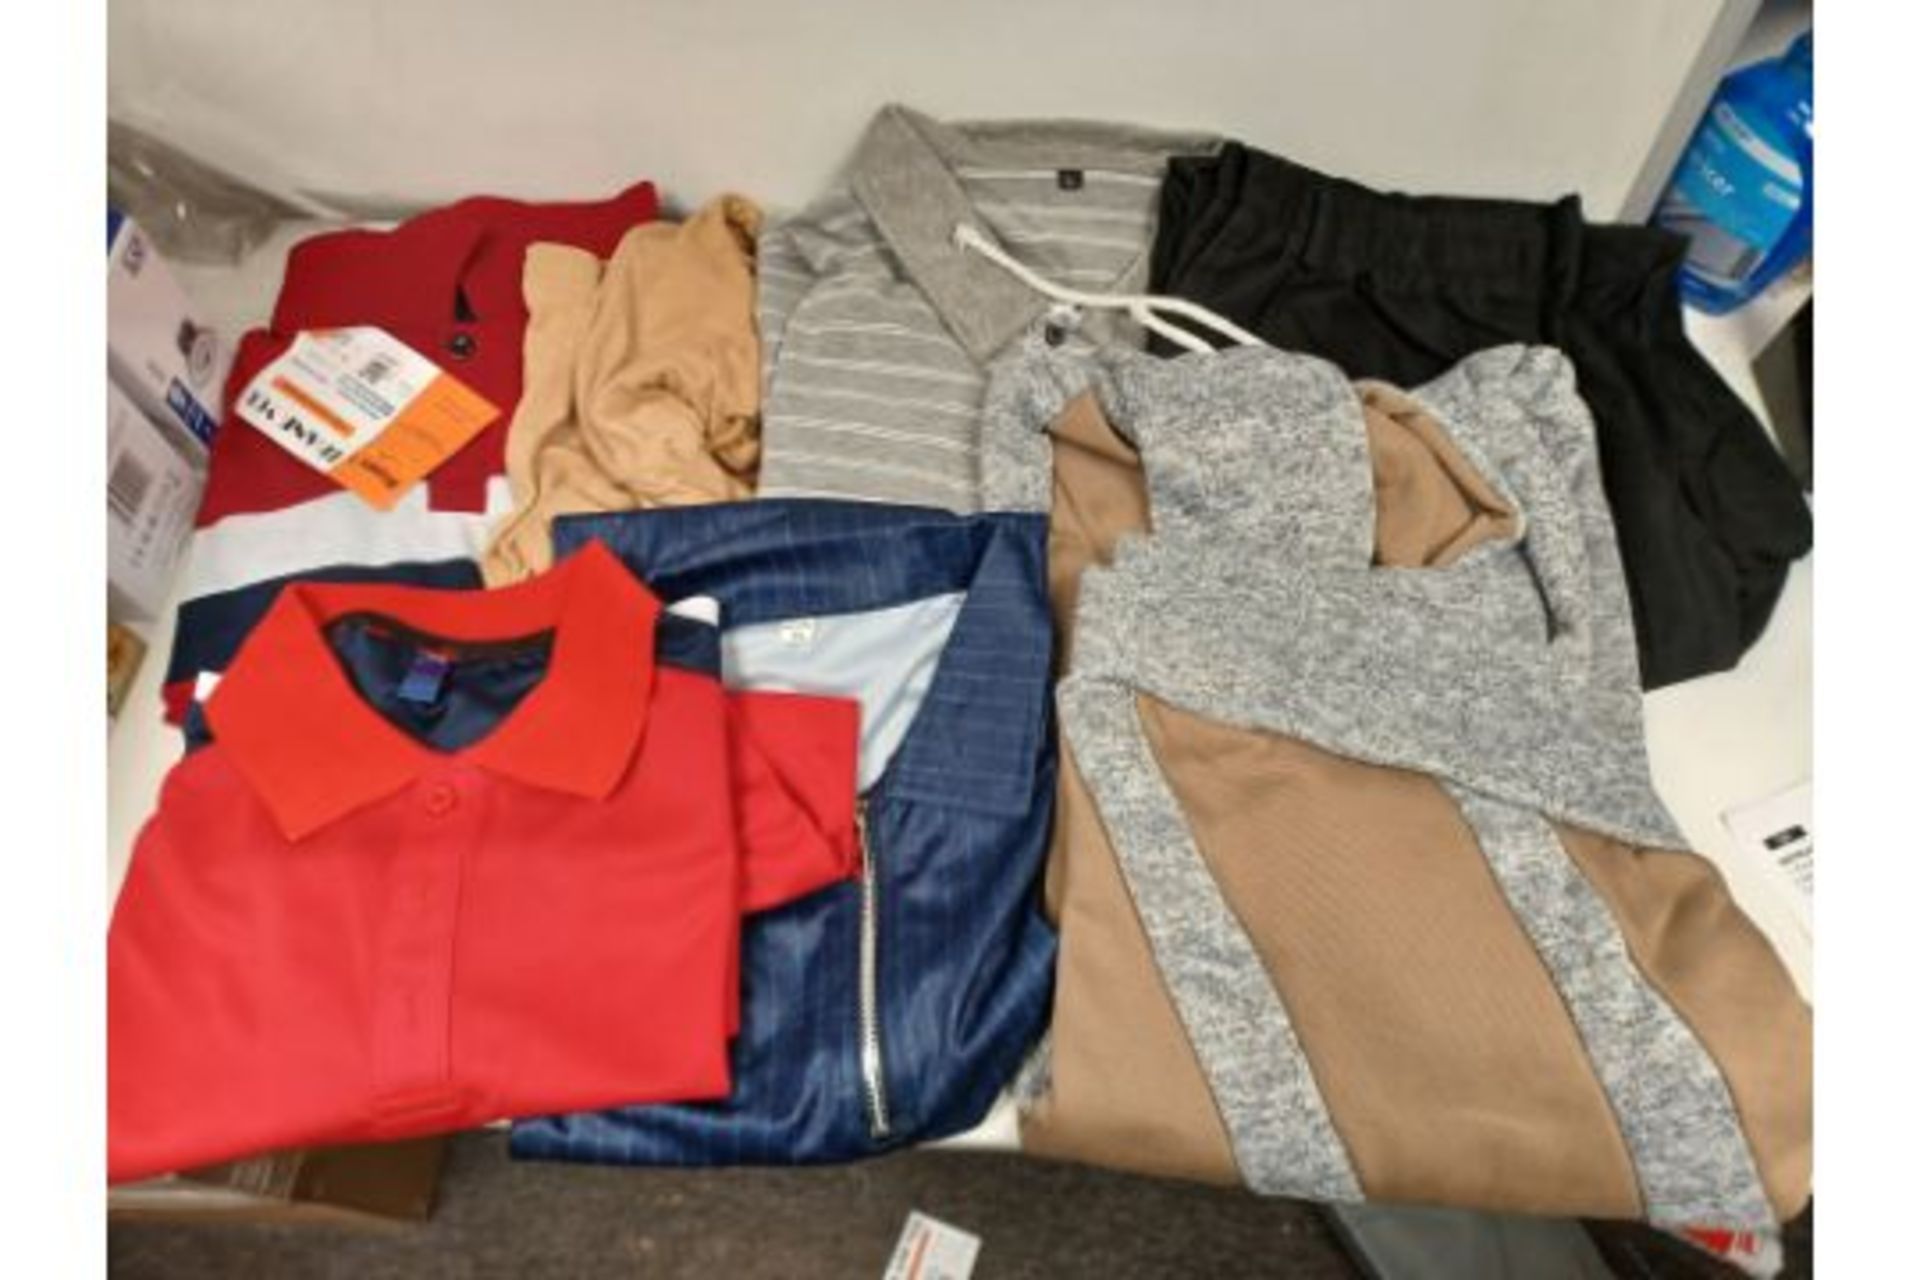 15 X BRAND NEW ASSORTED MENSWEAR LOT INCLUDING T SHIRTS, JUMPERS, HOODIES ETC